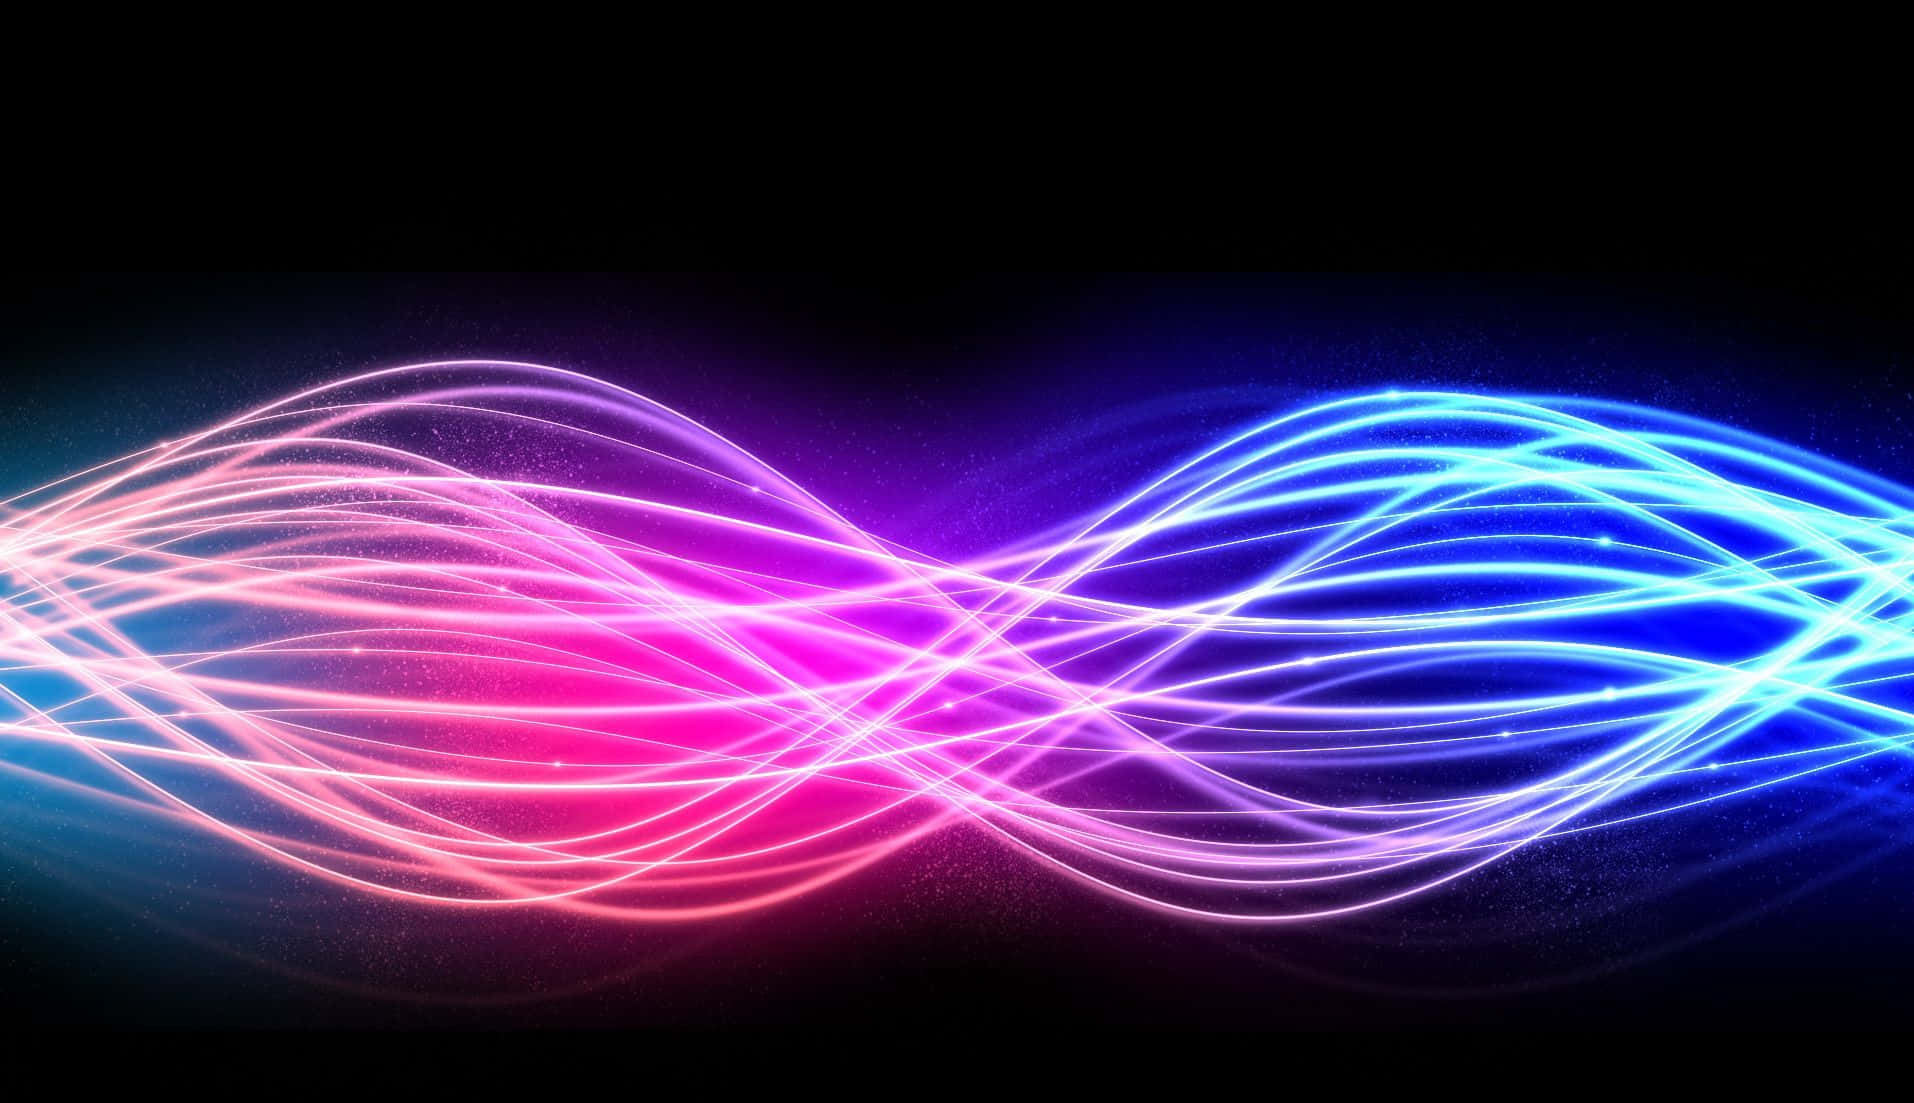 An abstract blue and purple electric energy background